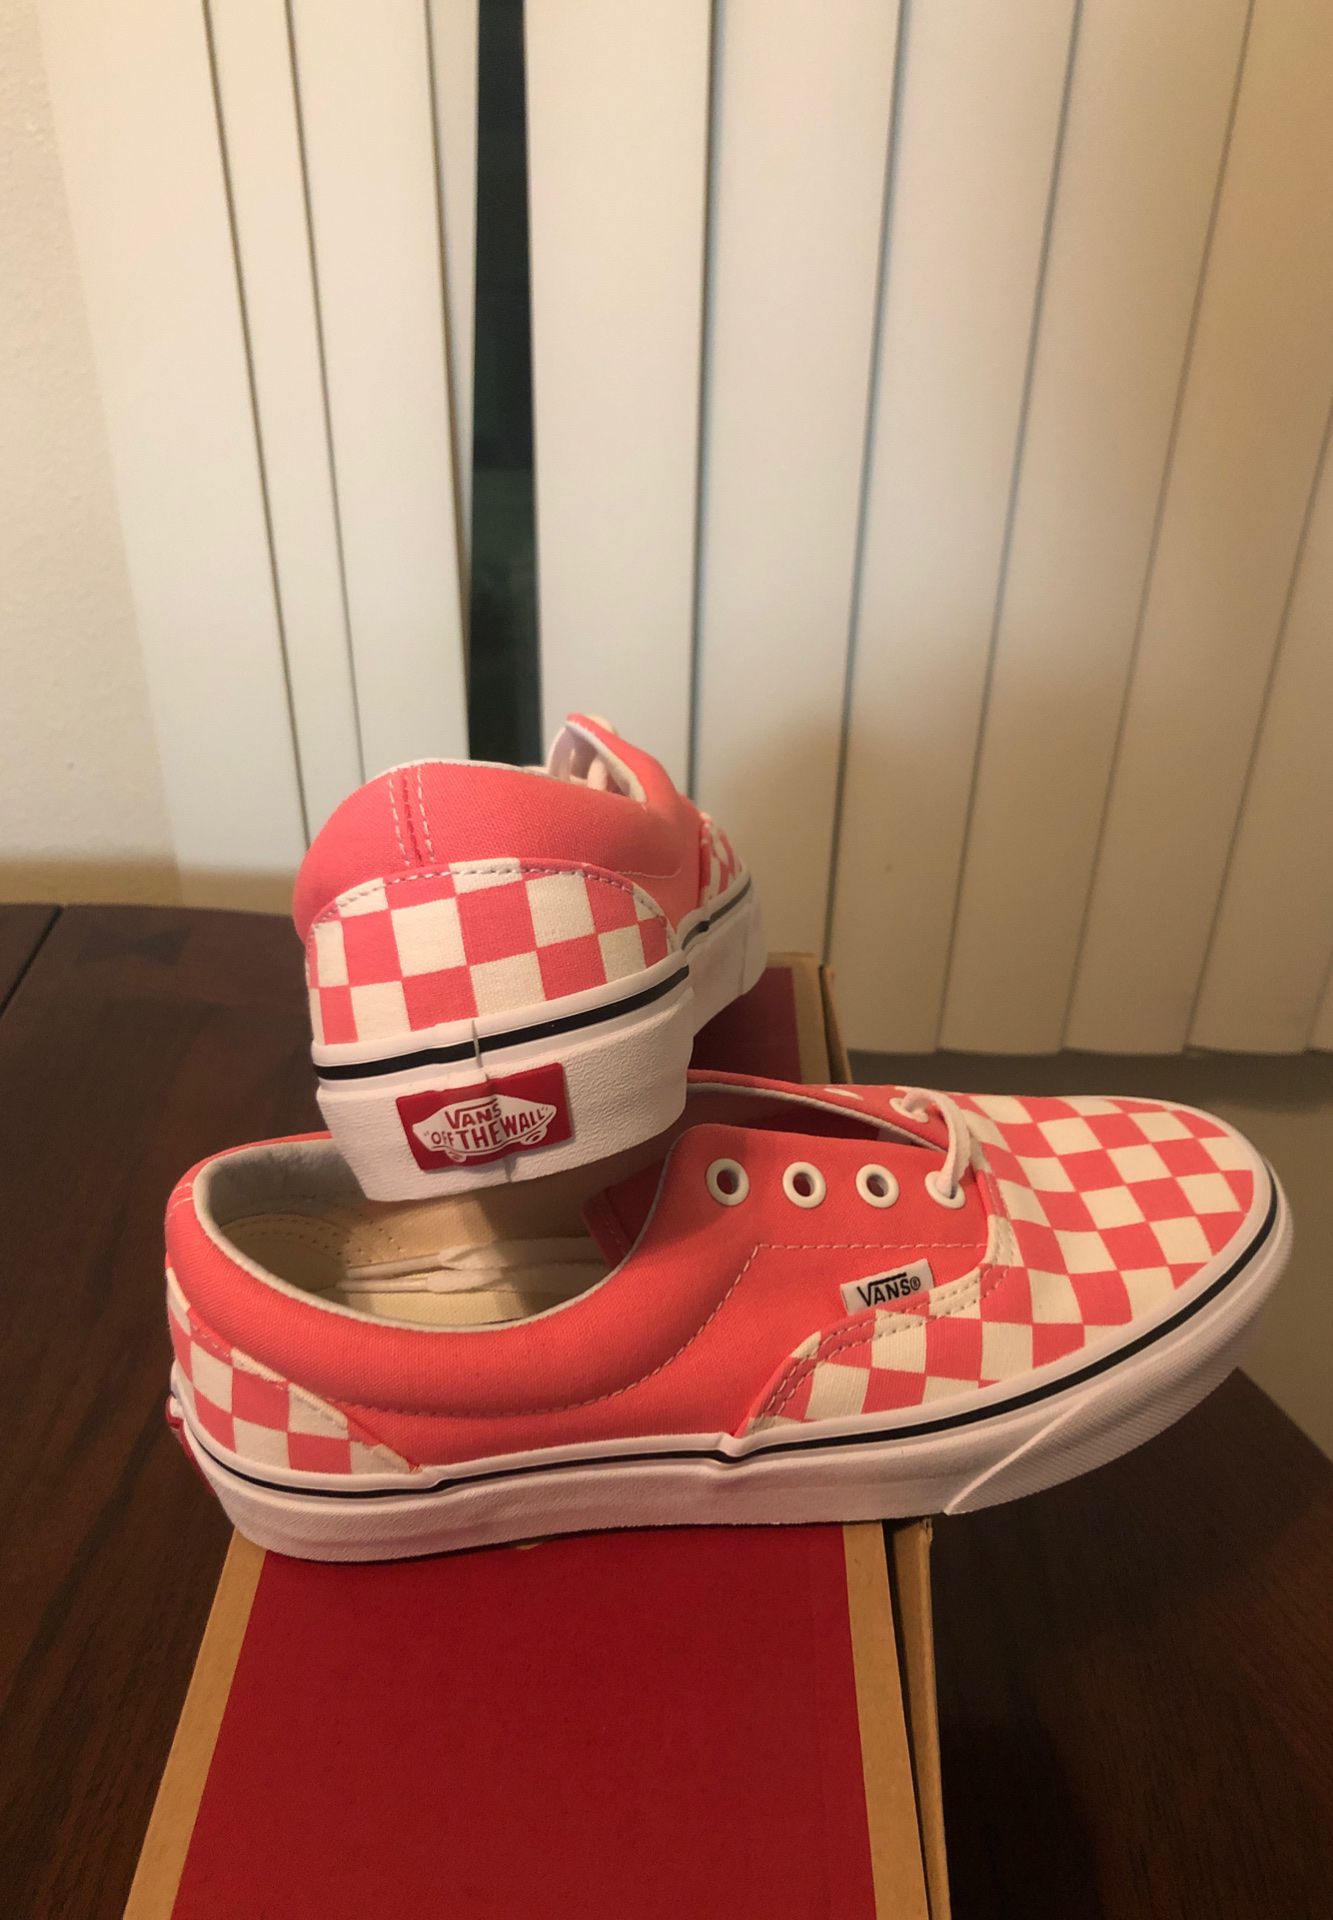 Brand new Vans pink sizes 6 and 7 $20.00 each pair